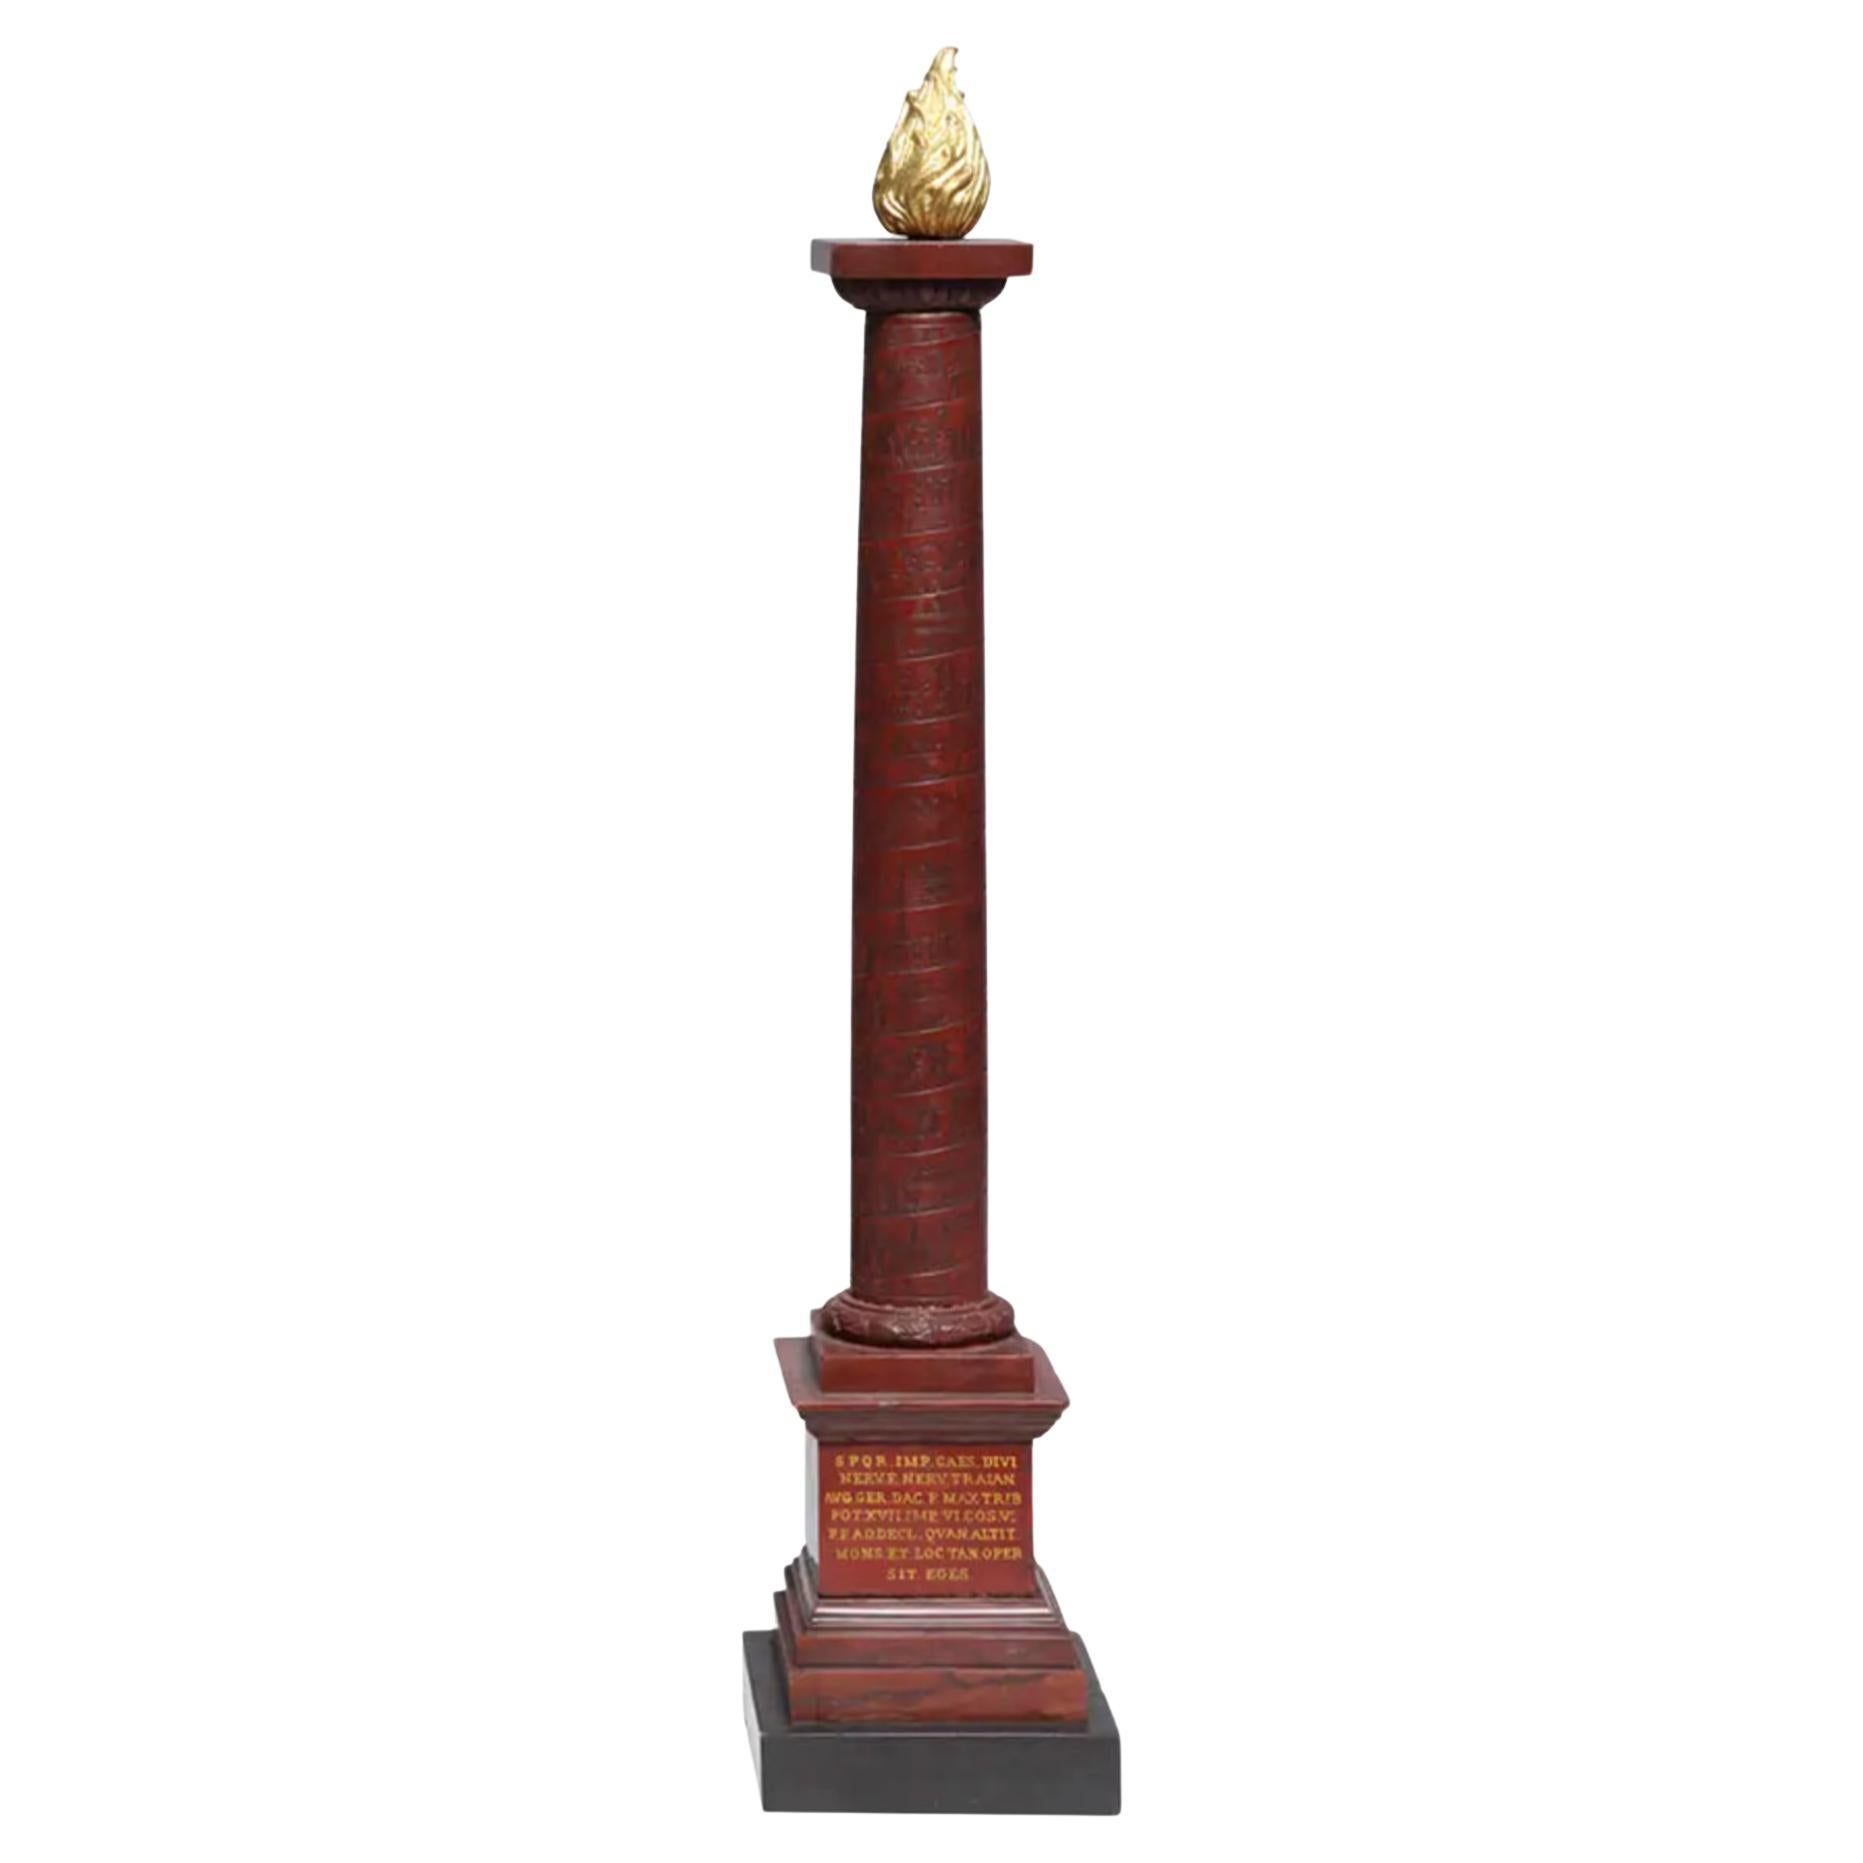 An Antique Grand Tour Period "Rosso Antico" Red Marble Obelisk Column w/ Flame For Sale